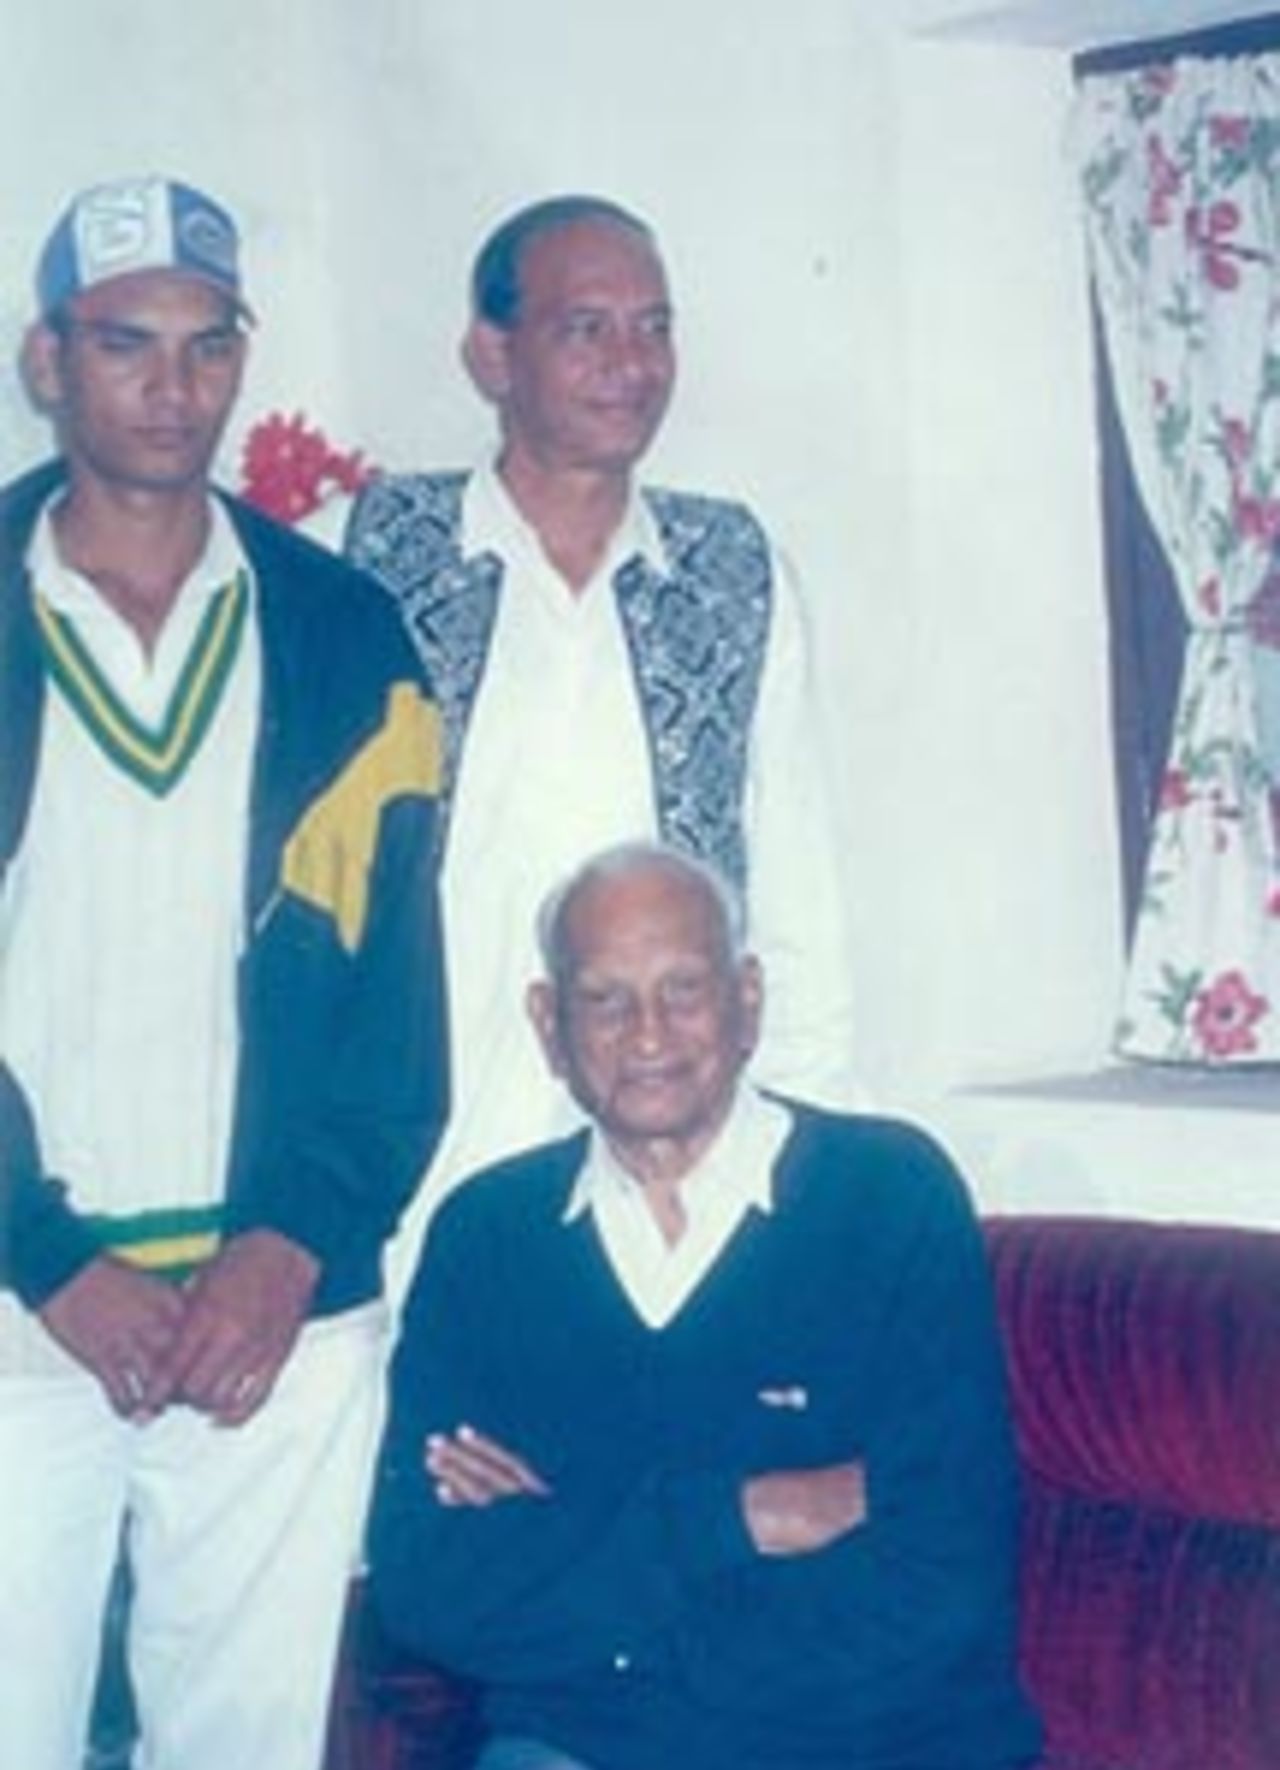 Mushtaq Ali with his son and grandson - three generations of cricketers, Indore.